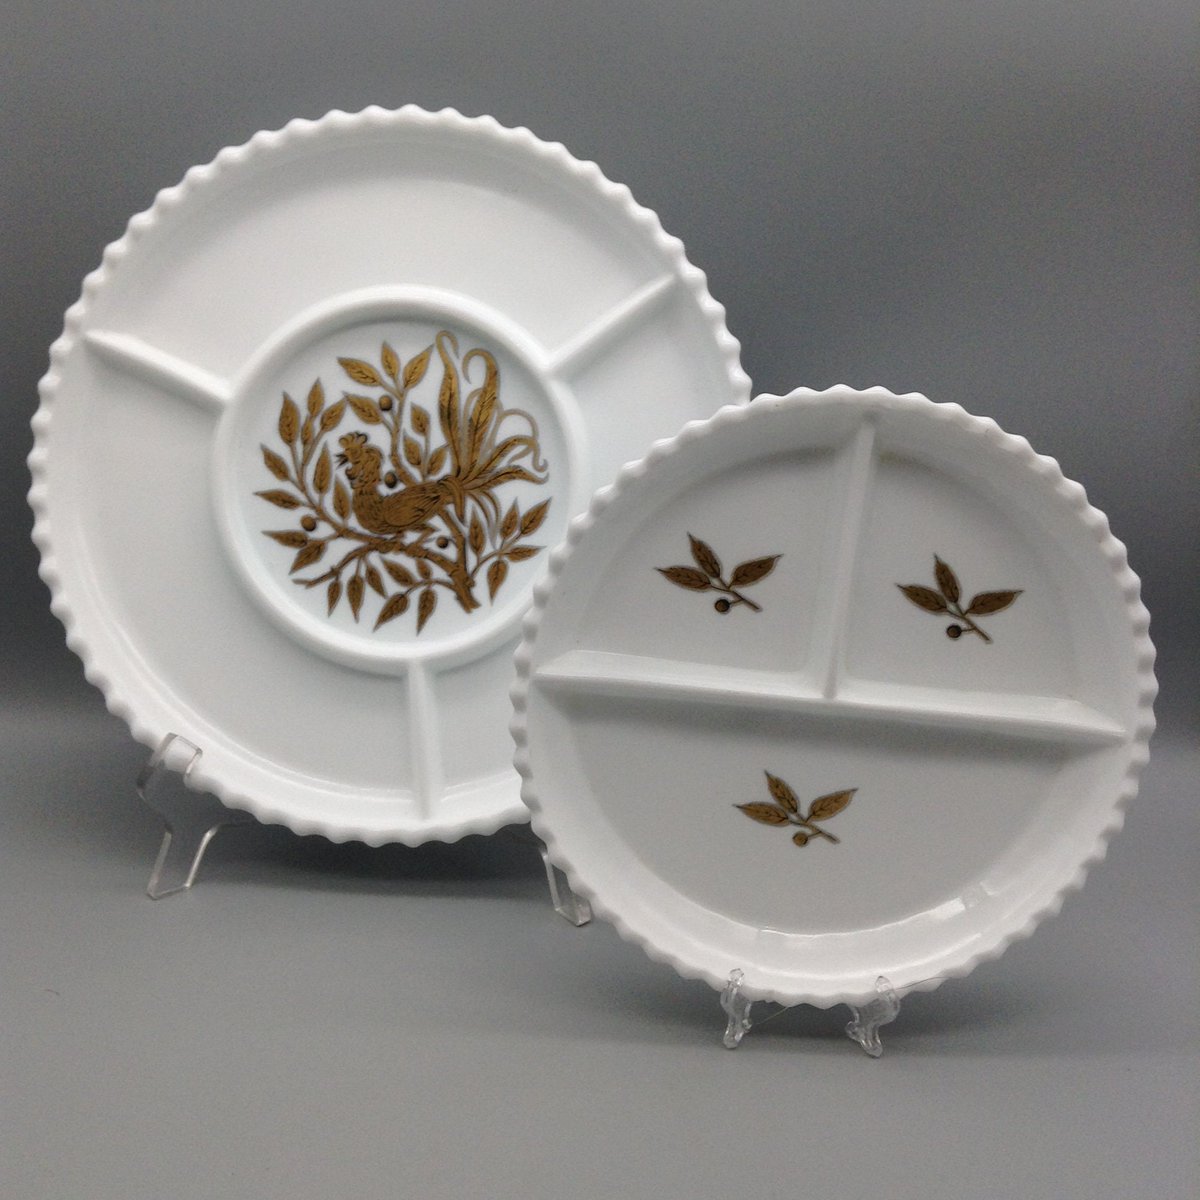 Excited to share the latest addition to my #etsy shop: Milk Glass Gold Pheasant Divided Serving Tray - Set of 2 etsy.me/3ZvpIPm #white #gold #glass #goldaccent #pheasant #dividedservingtray #servingtray #divideddish #milkglassdish